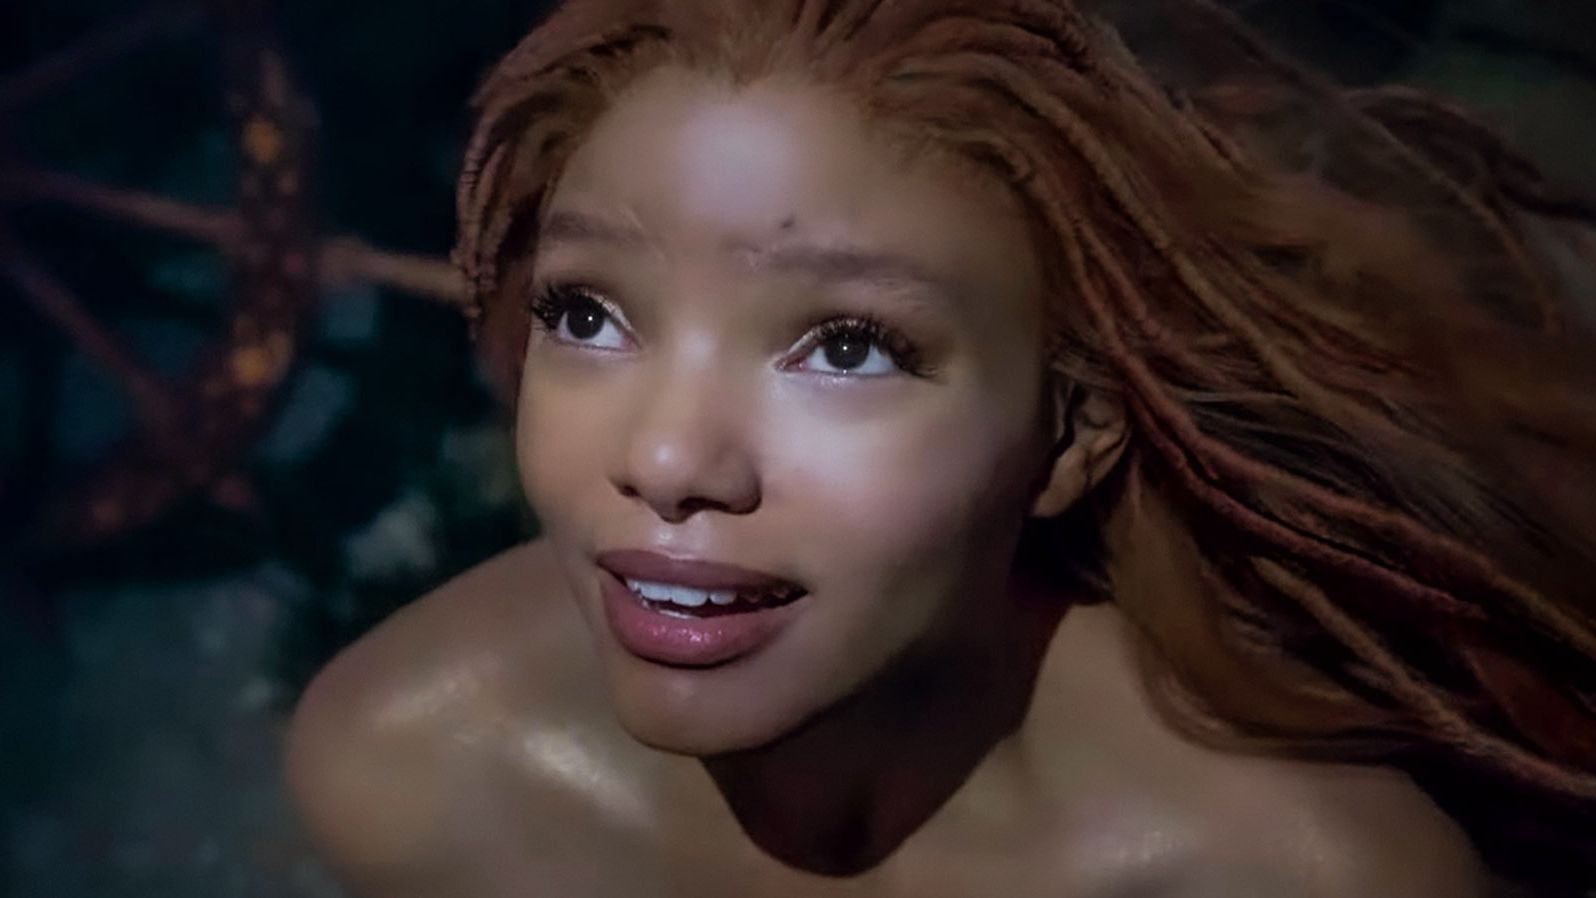 Disney Might Make Its Own Live-Action Little Mermaid